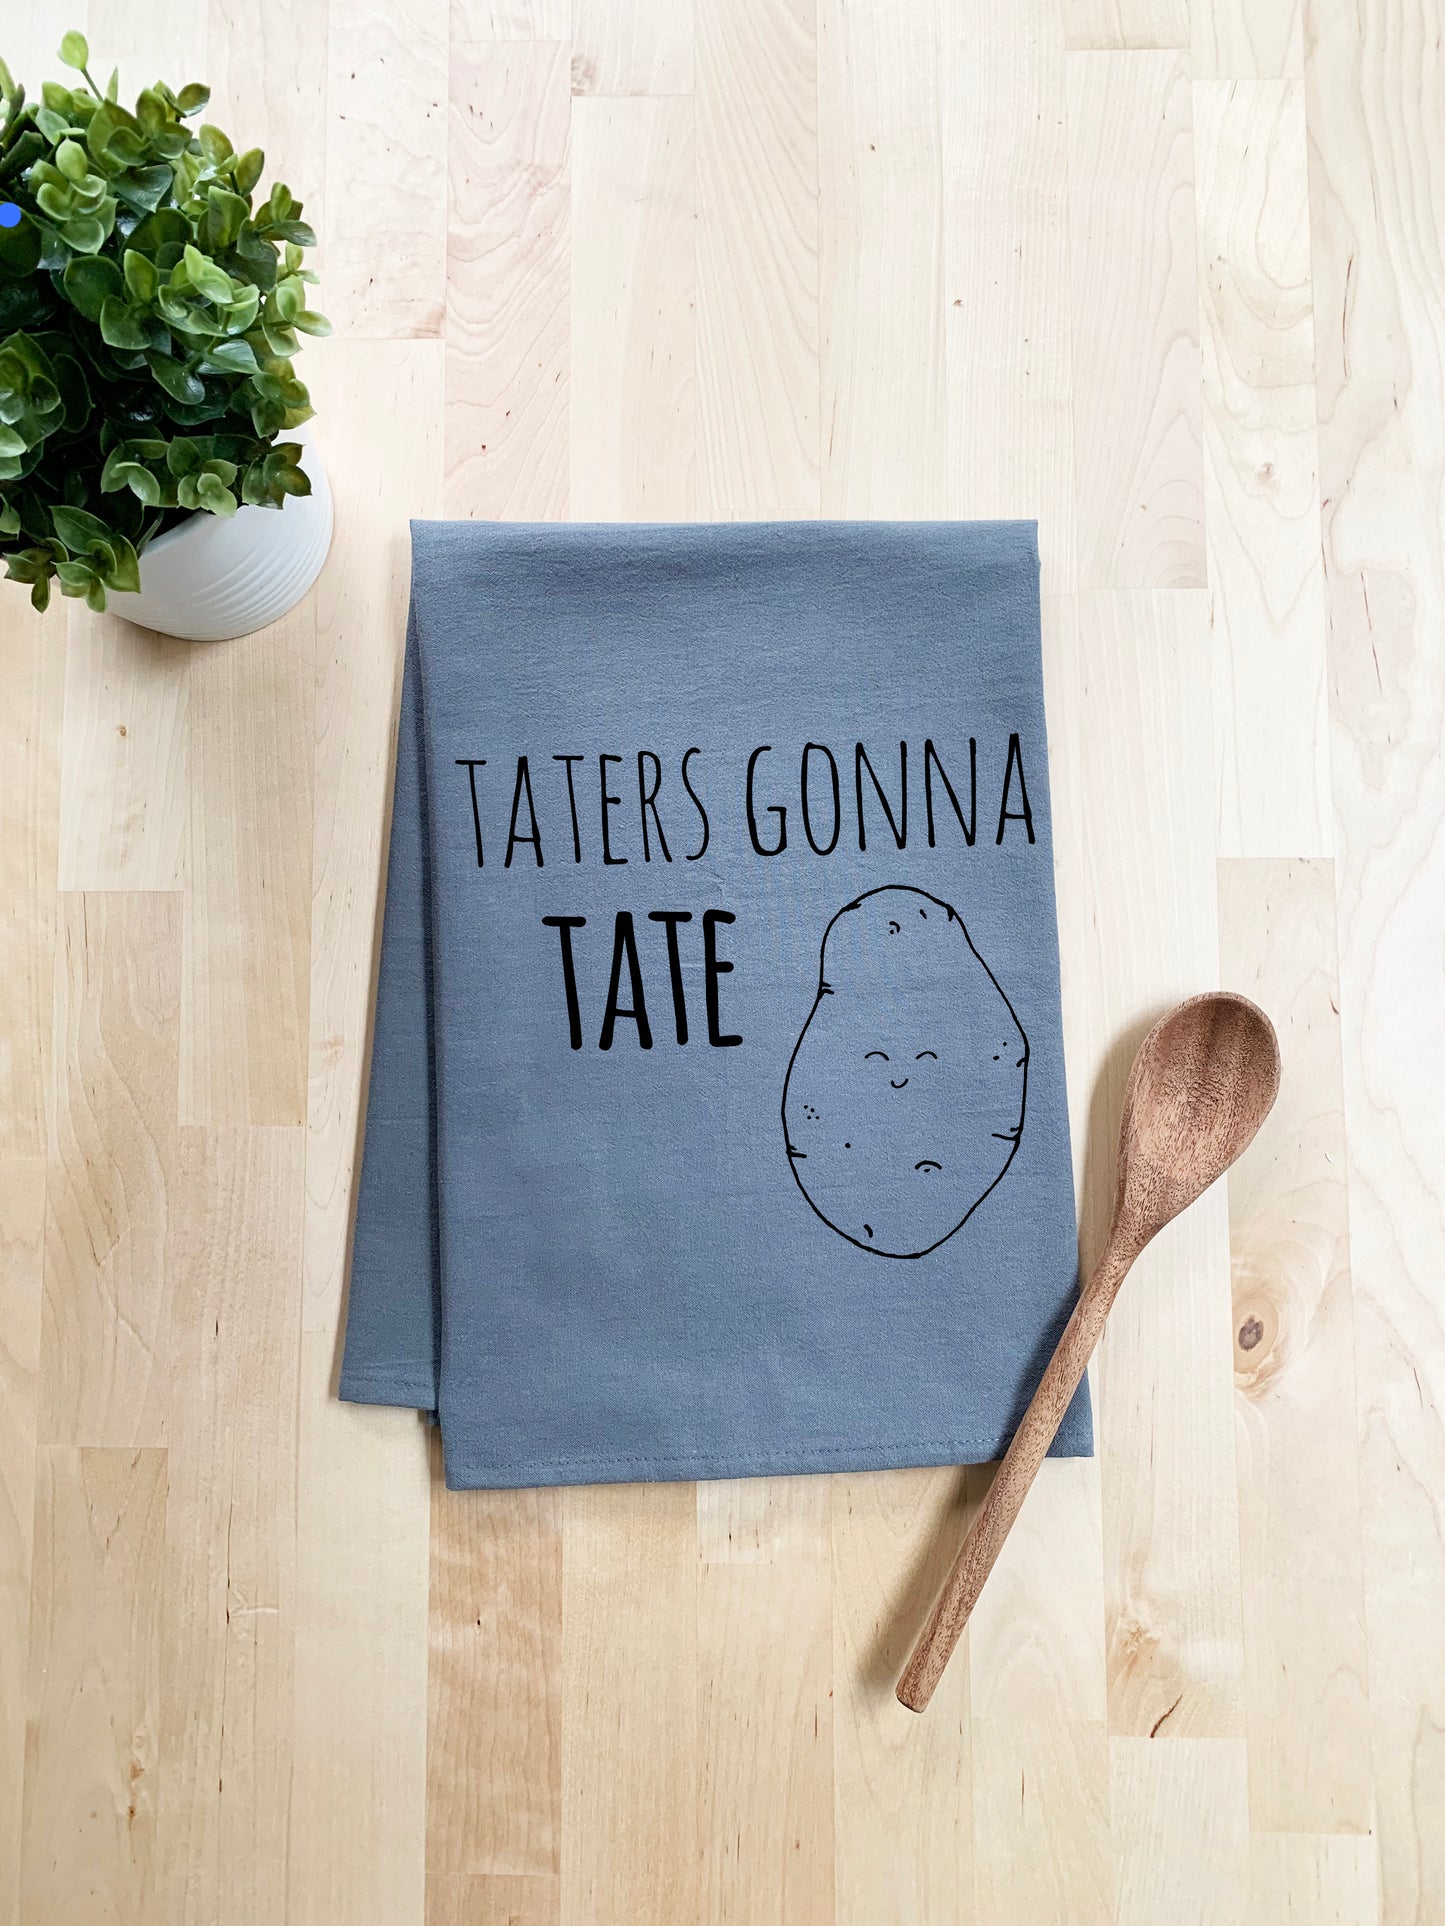 Taters Gonna Tate Dish Towel - White Or Gray - MoonlightMakers